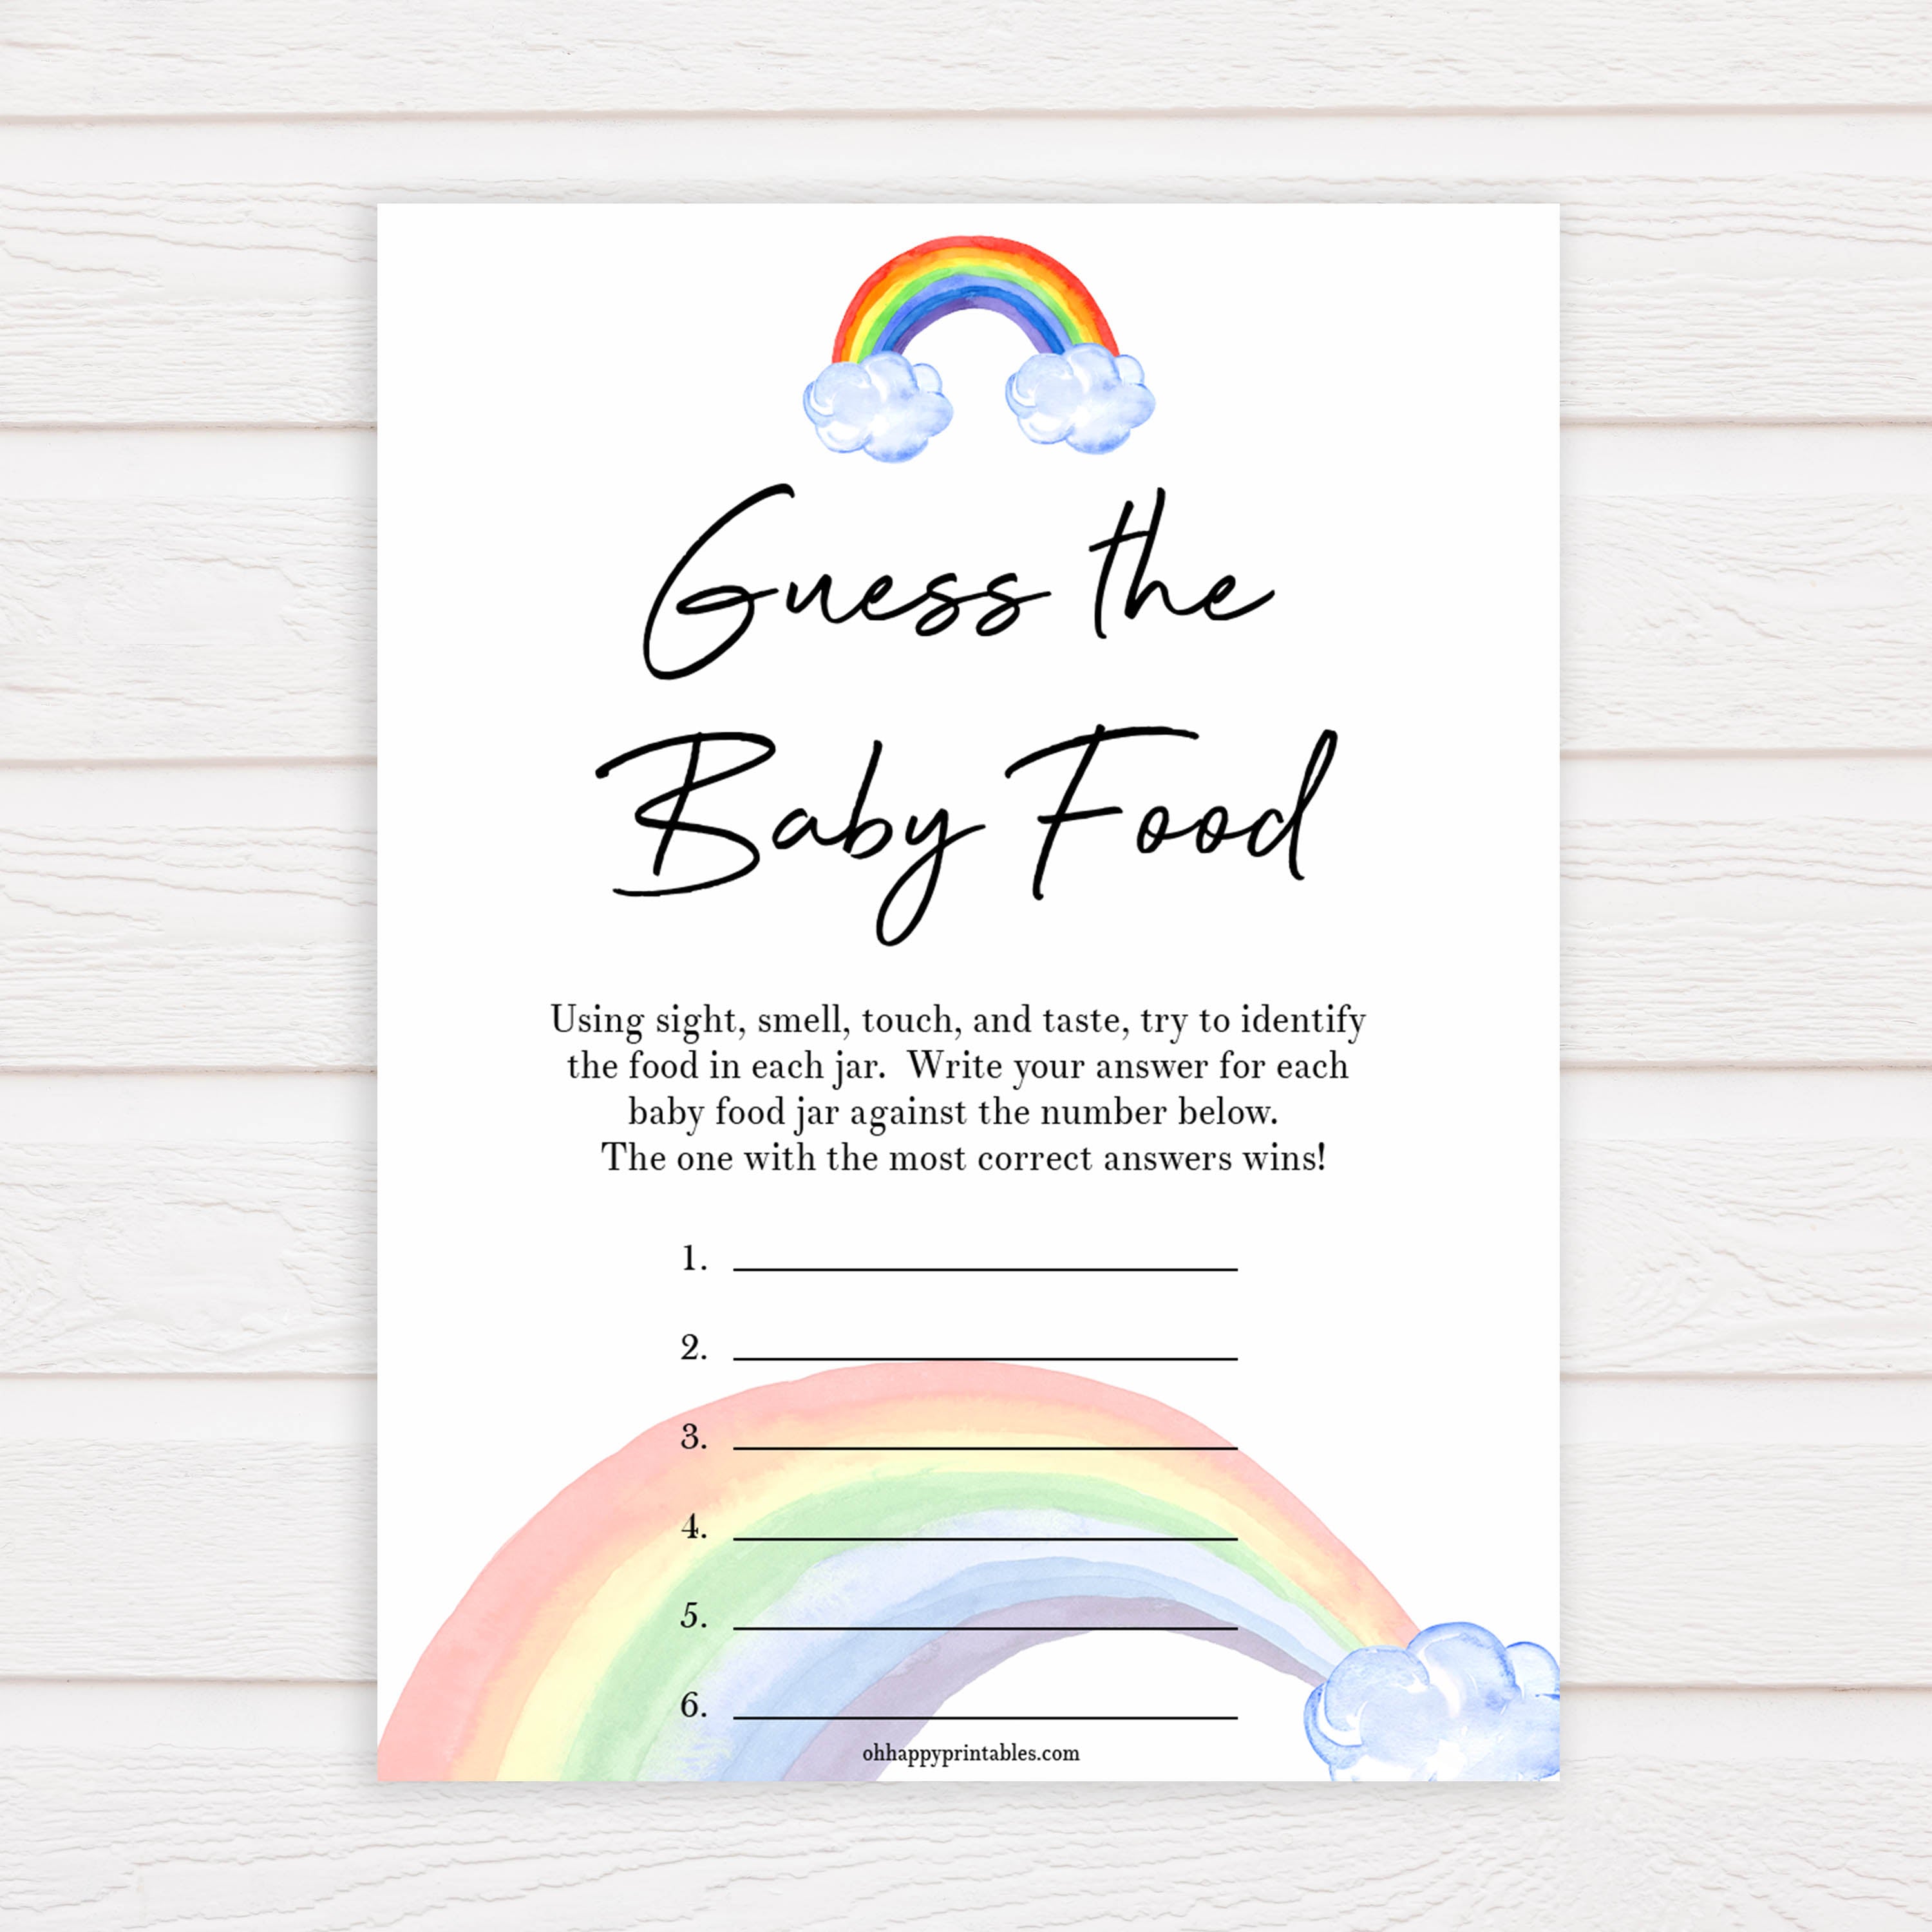 Rainbow baby games, rainbow guess the baby food, rainbow printable baby games, instant download games, rainbow baby shower, printable baby games, fun baby games, popular baby games, top 10 baby games